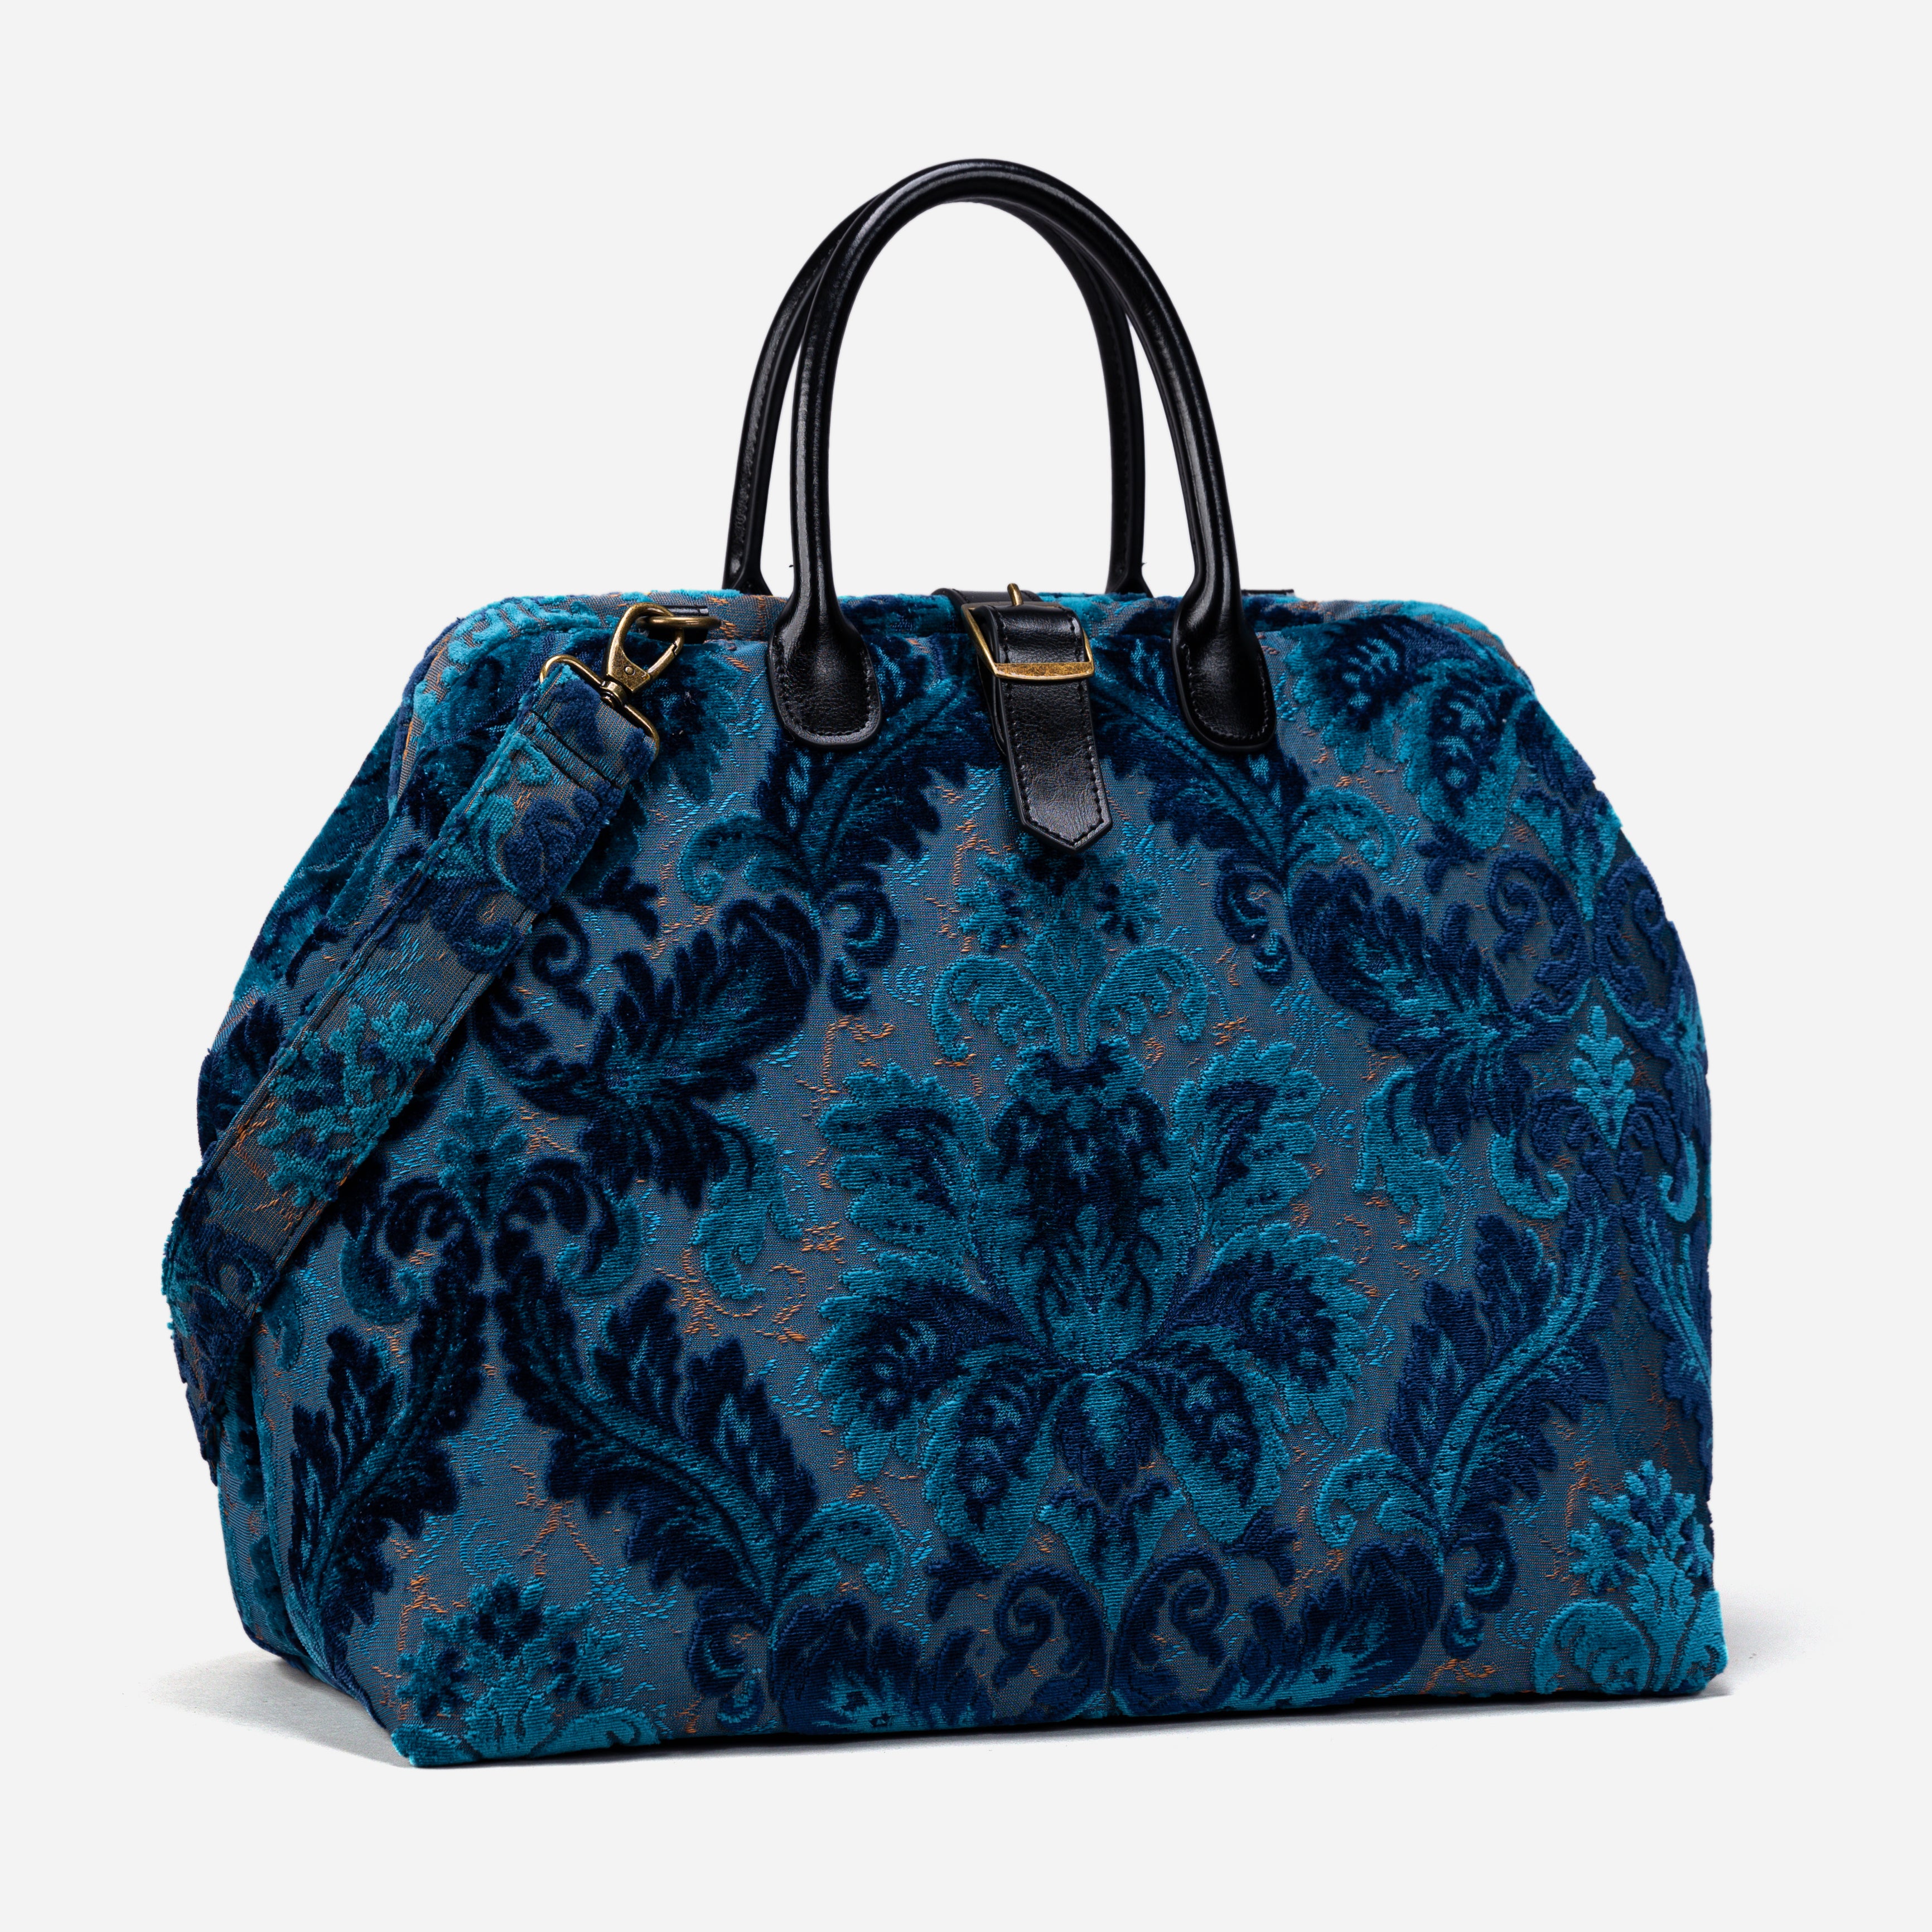 Mary Poppins Carpetbag Revival aqua weekender overview